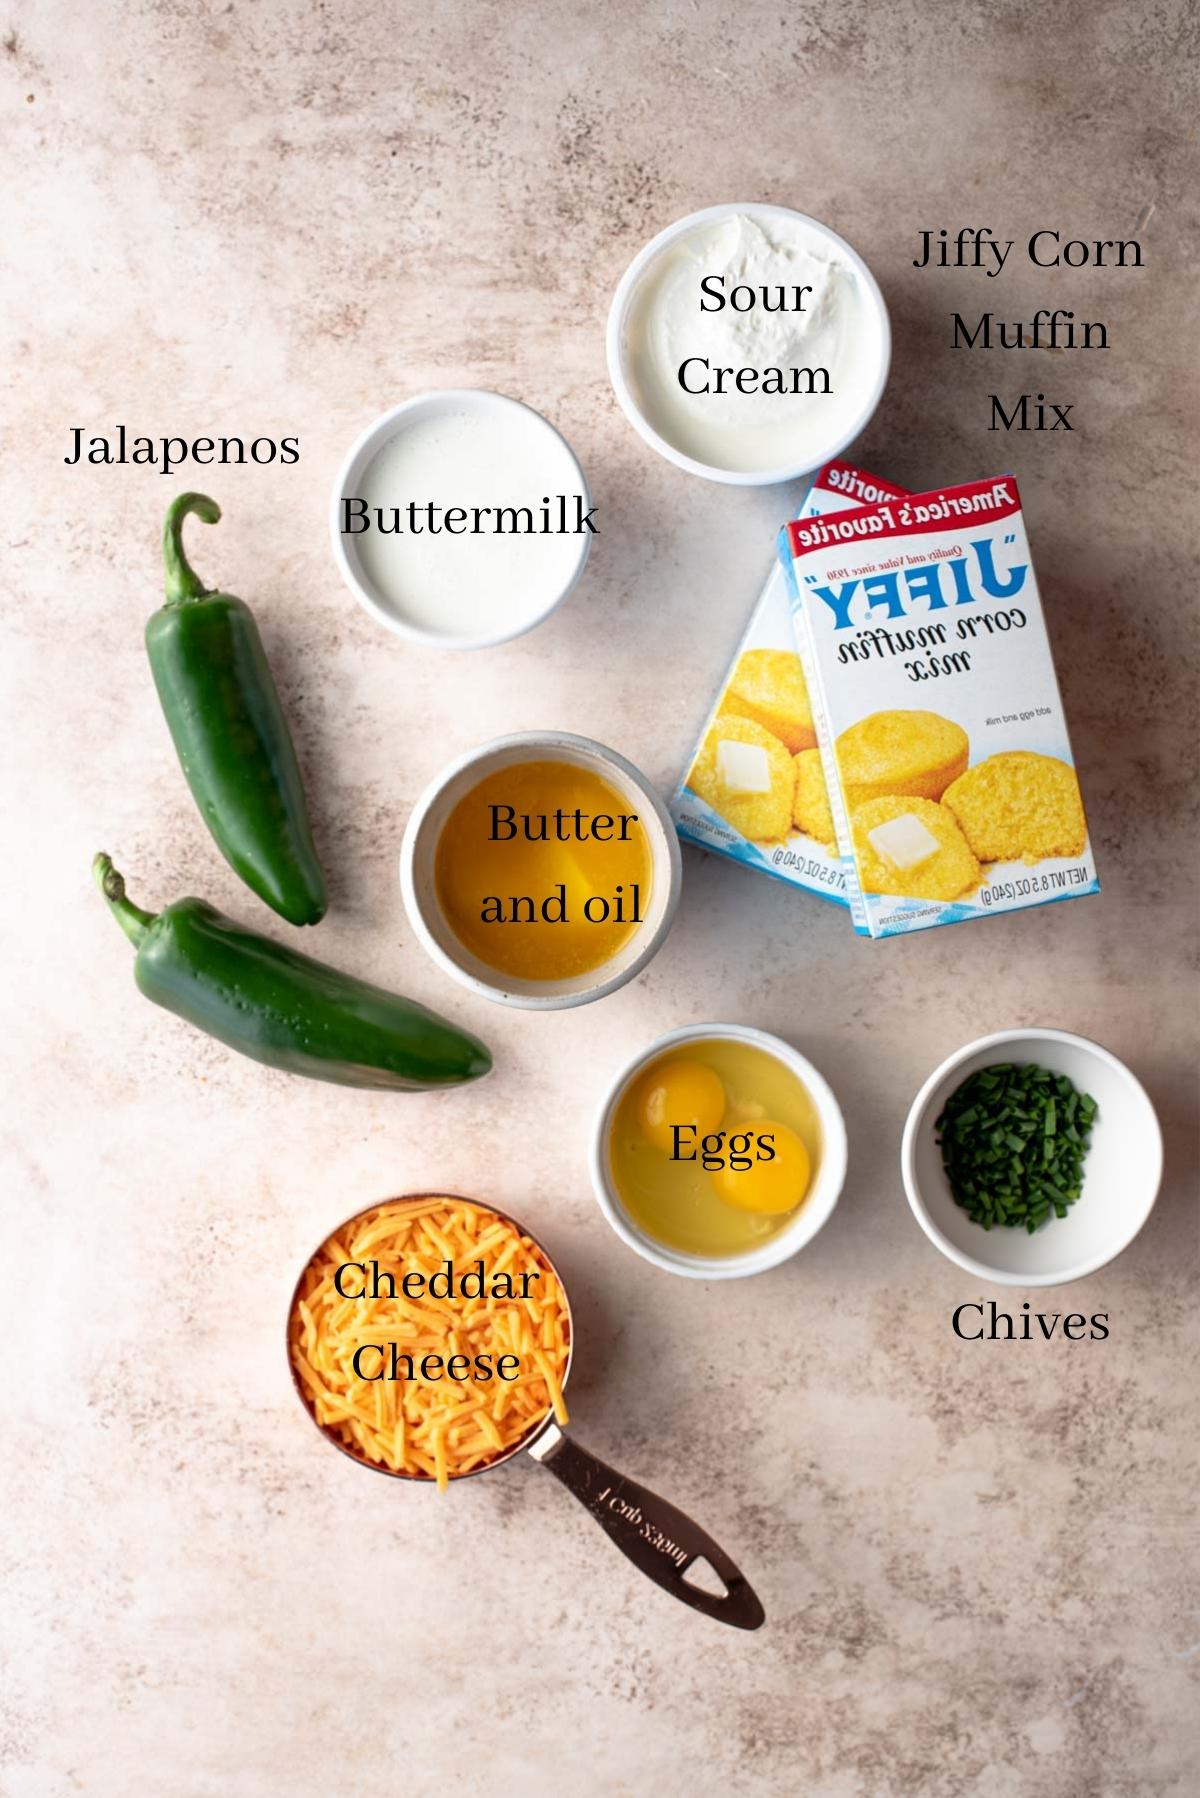 Ingredients for jalapeno cornbread on a table.